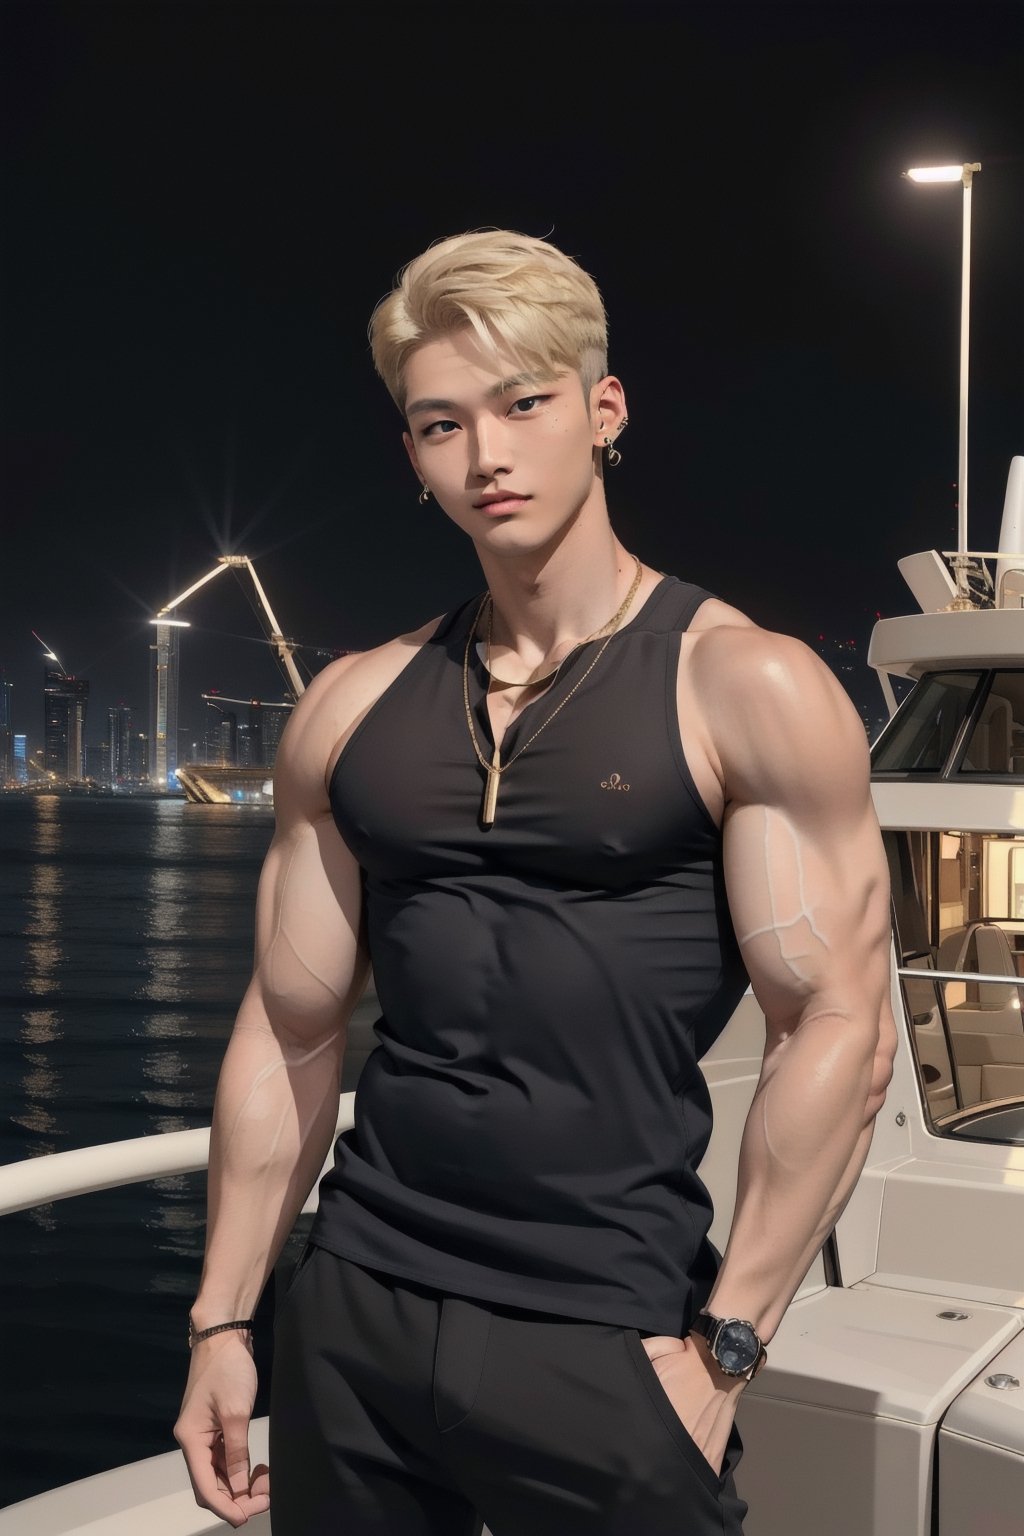 intricate detail, 18 year old, young handsome asian male wearing black tanktop,  kpop,ikemen, blue eyes, handsome, earrings, gold necklace, luxuary golden omega watch,  blond hair, big muscle, physique, fitness model, wealthy, billionair,  standing, in front of private yatch, dubai night background